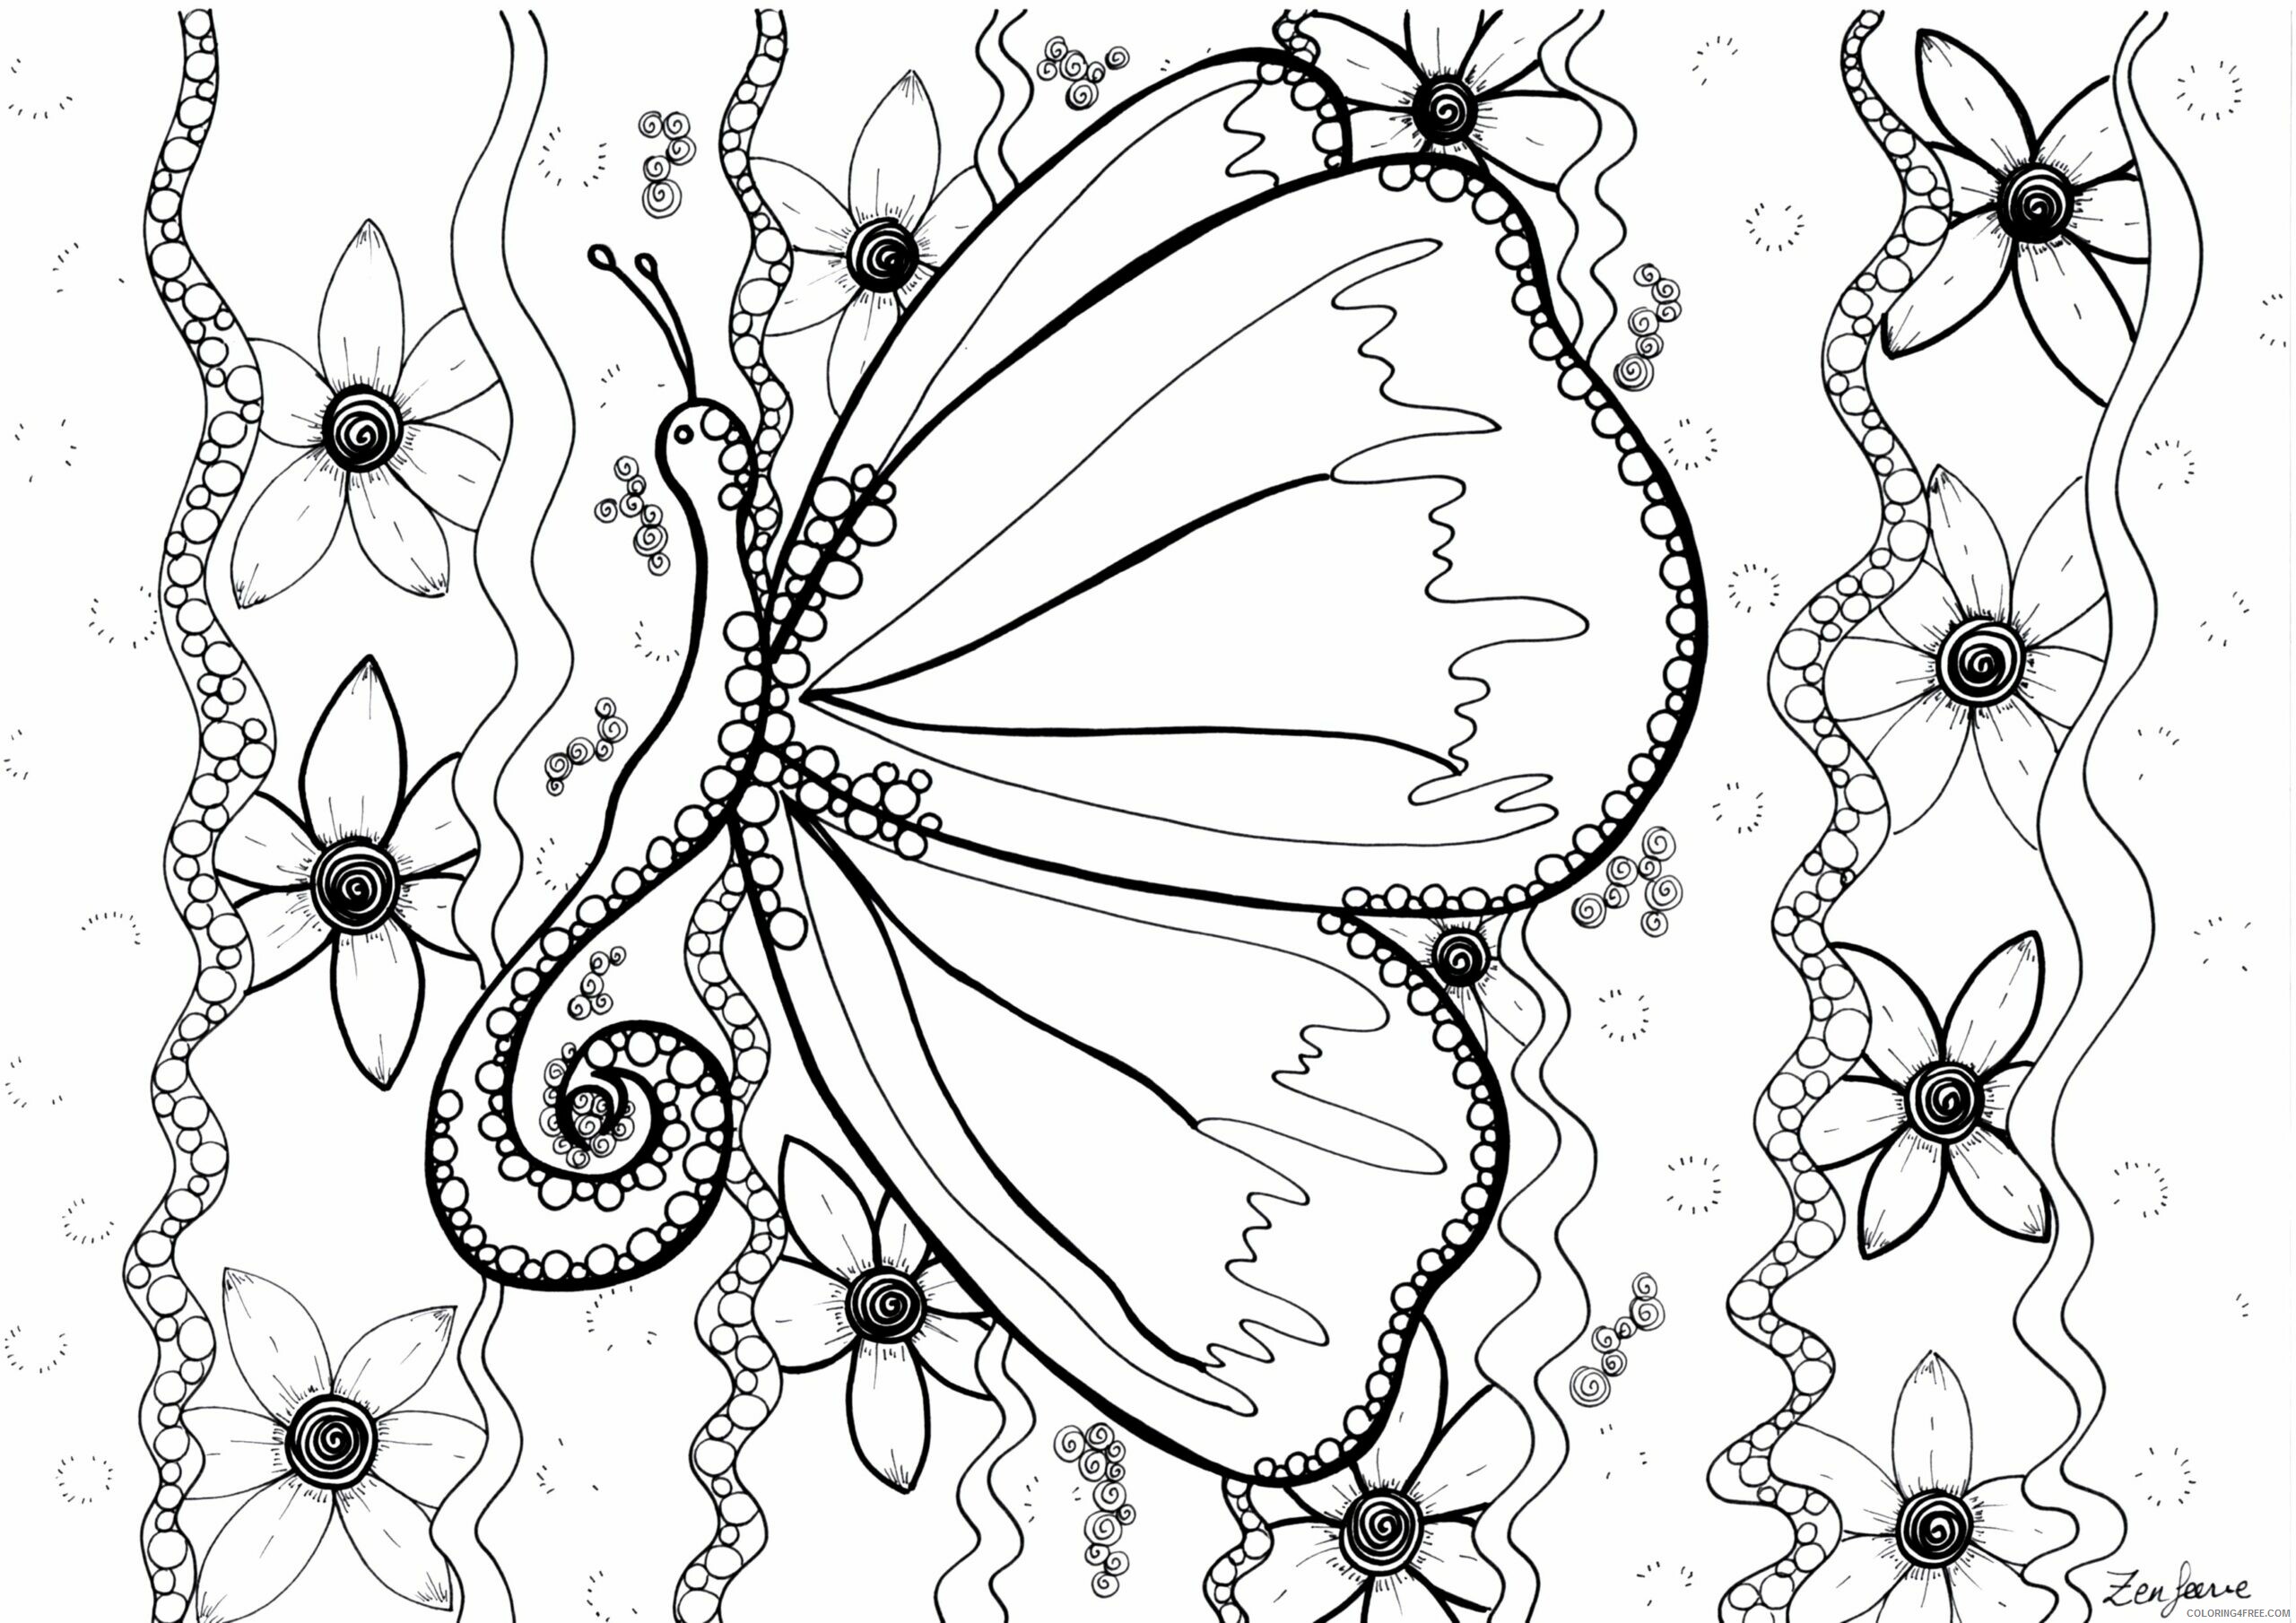 Animal Zentangle Coloring Pages adult butterfly by zenfeerie Printable 2020 135 Coloring4free